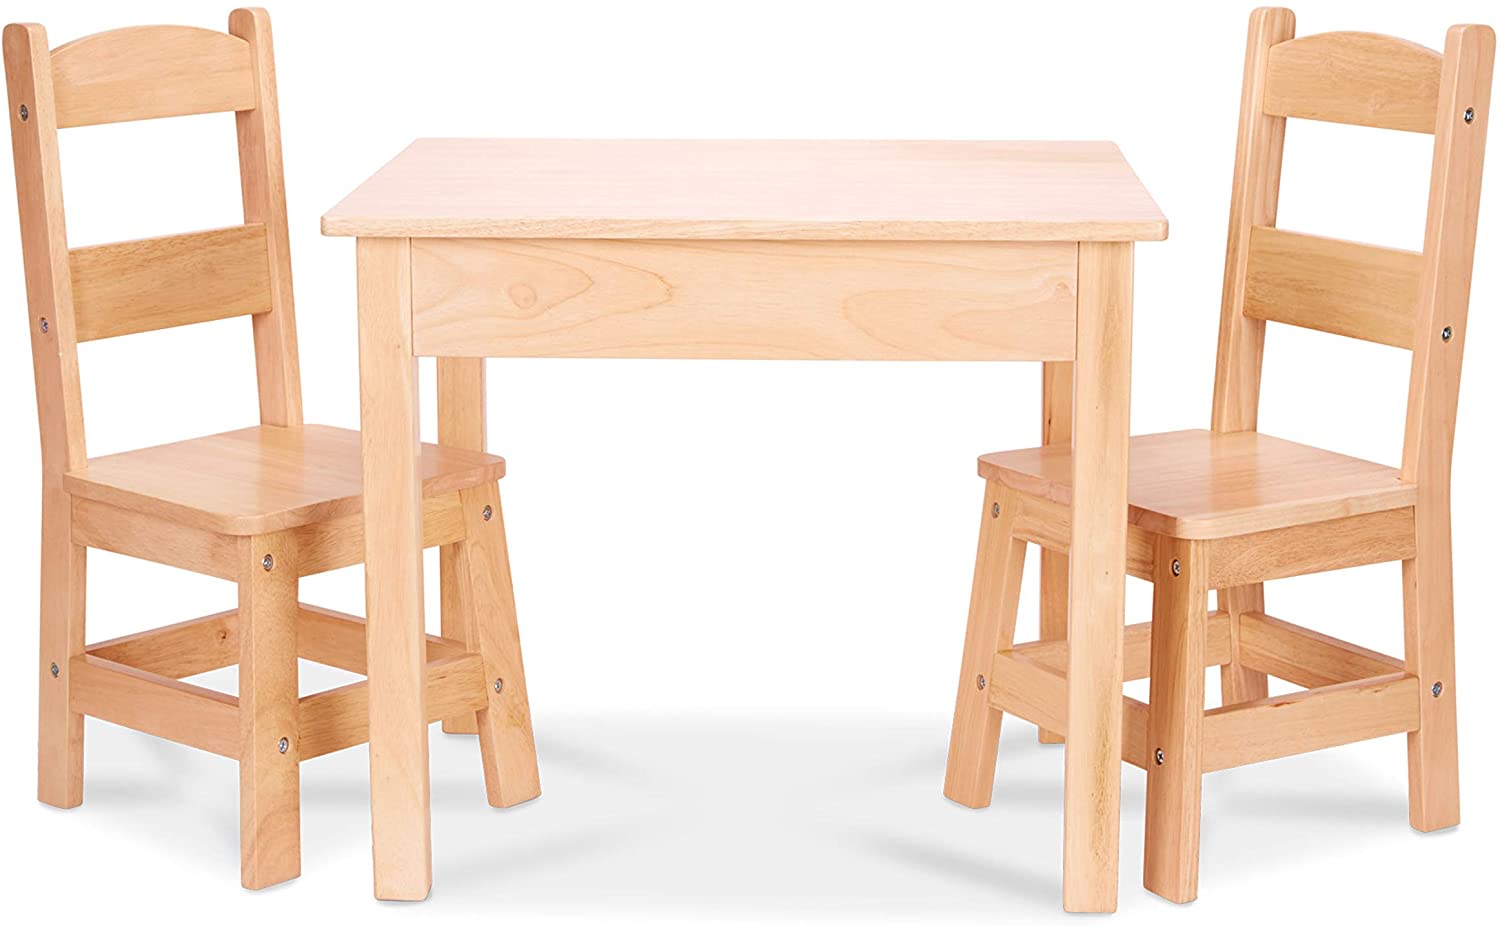 Melissa & Doug Solid Wood Table and 2 Chairs Set (Light Finish) $79.79 + Free Shipping